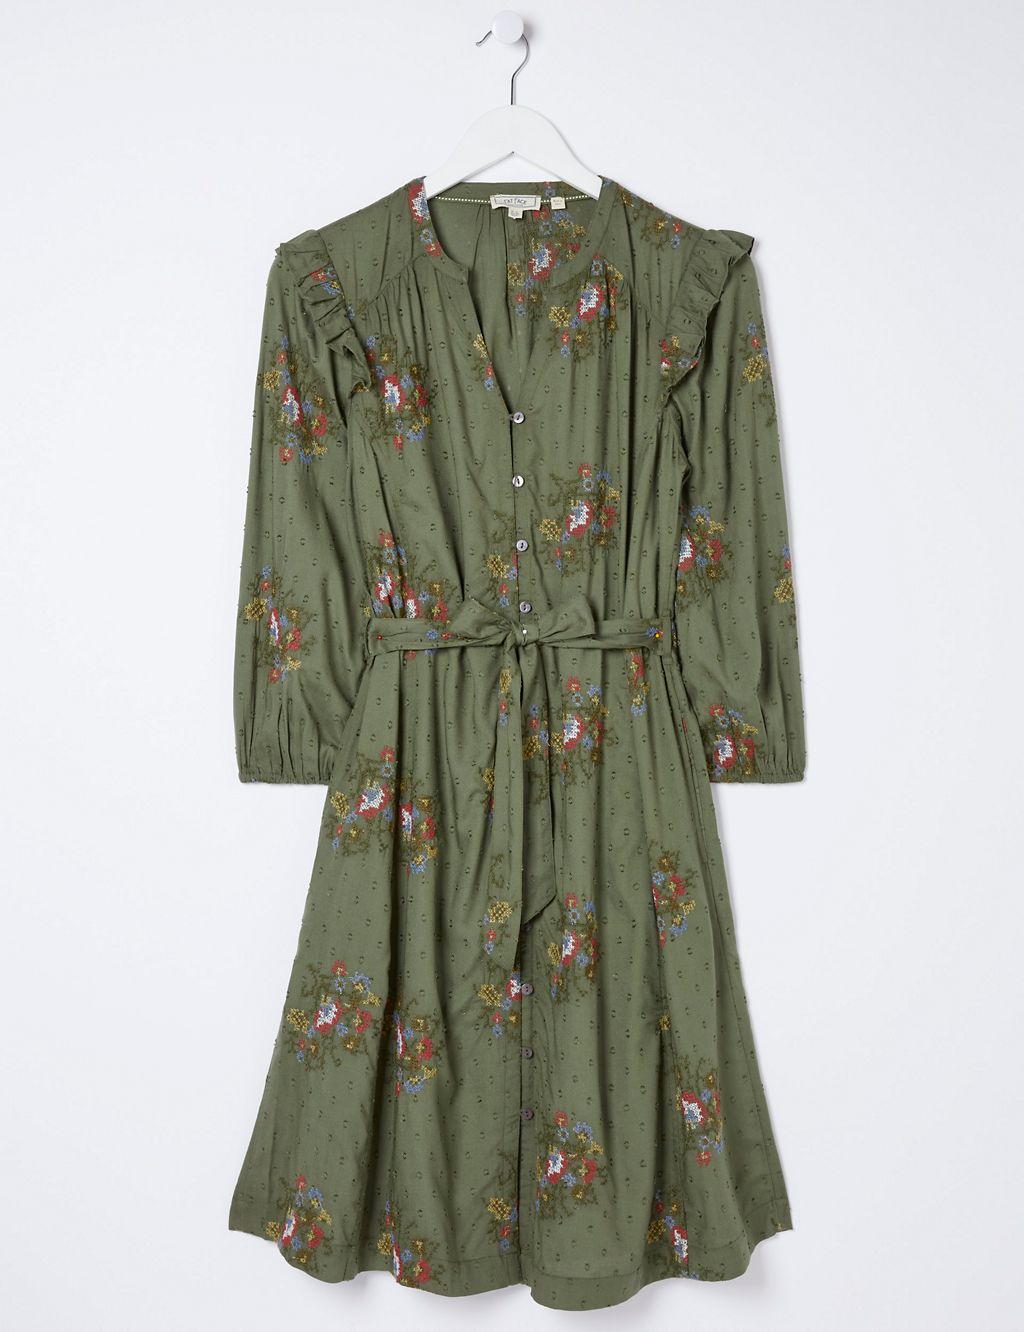 Embroidered Notch Neck Belted Shirt Dress 1 of 5